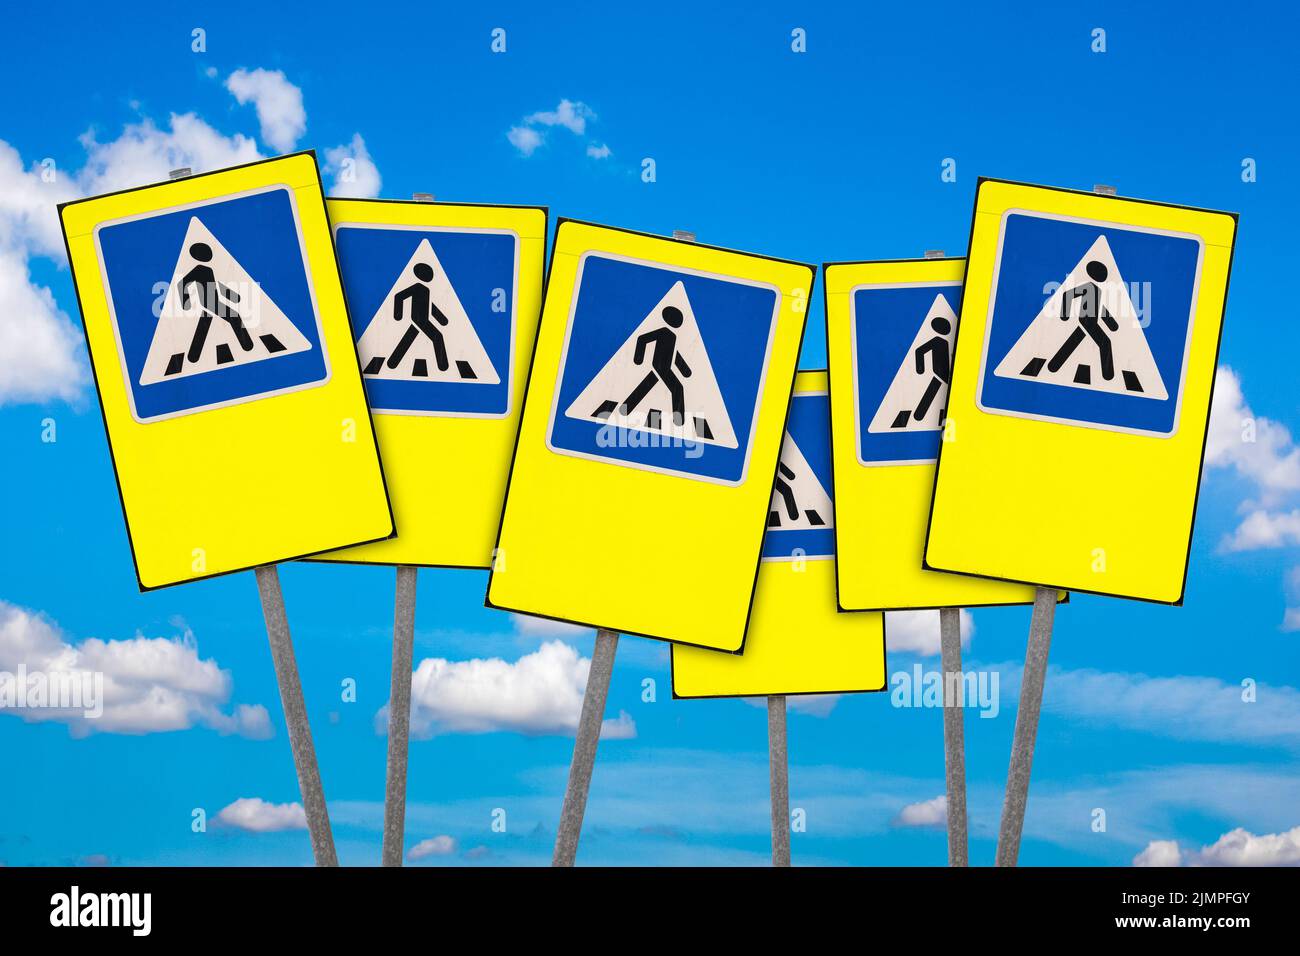 Pedestrian crossing signs on  sky background Stock Photo